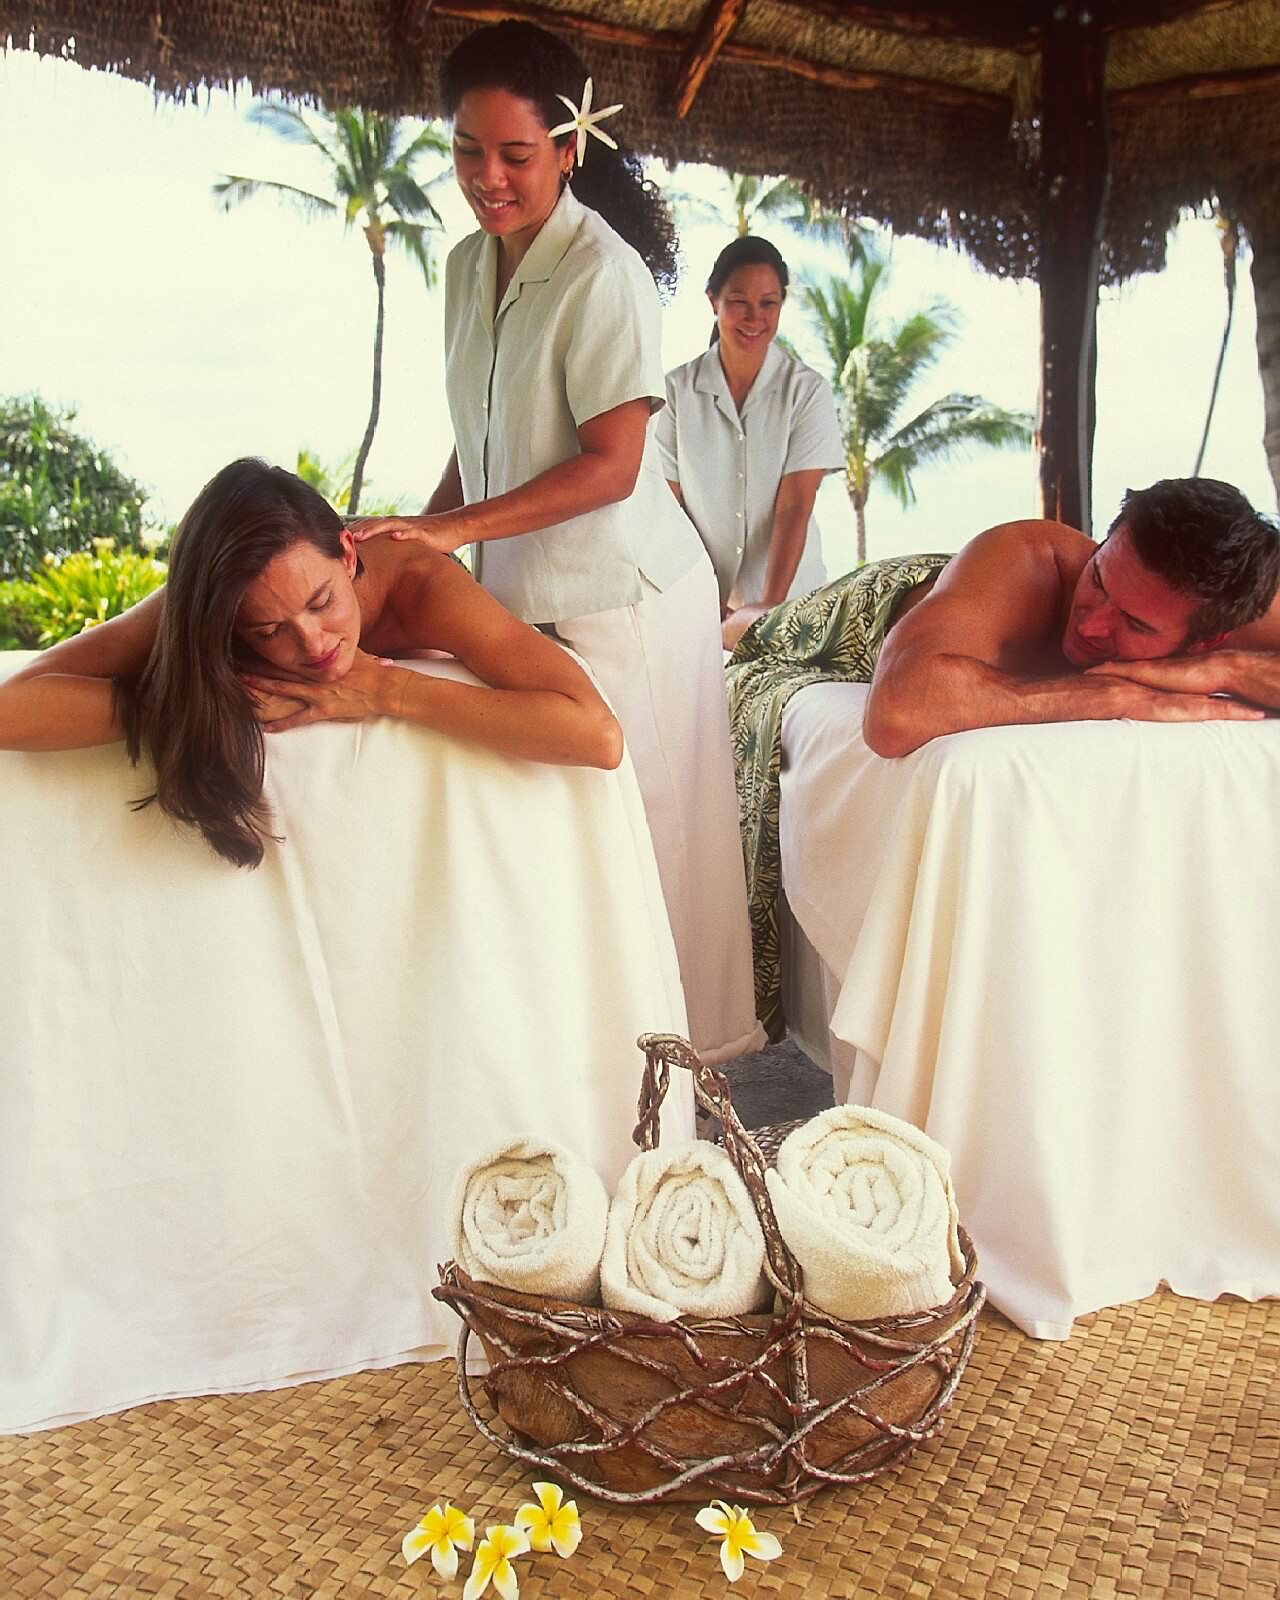 The Spa At Four Seasons Resort Maui Introduces Slimming Experience